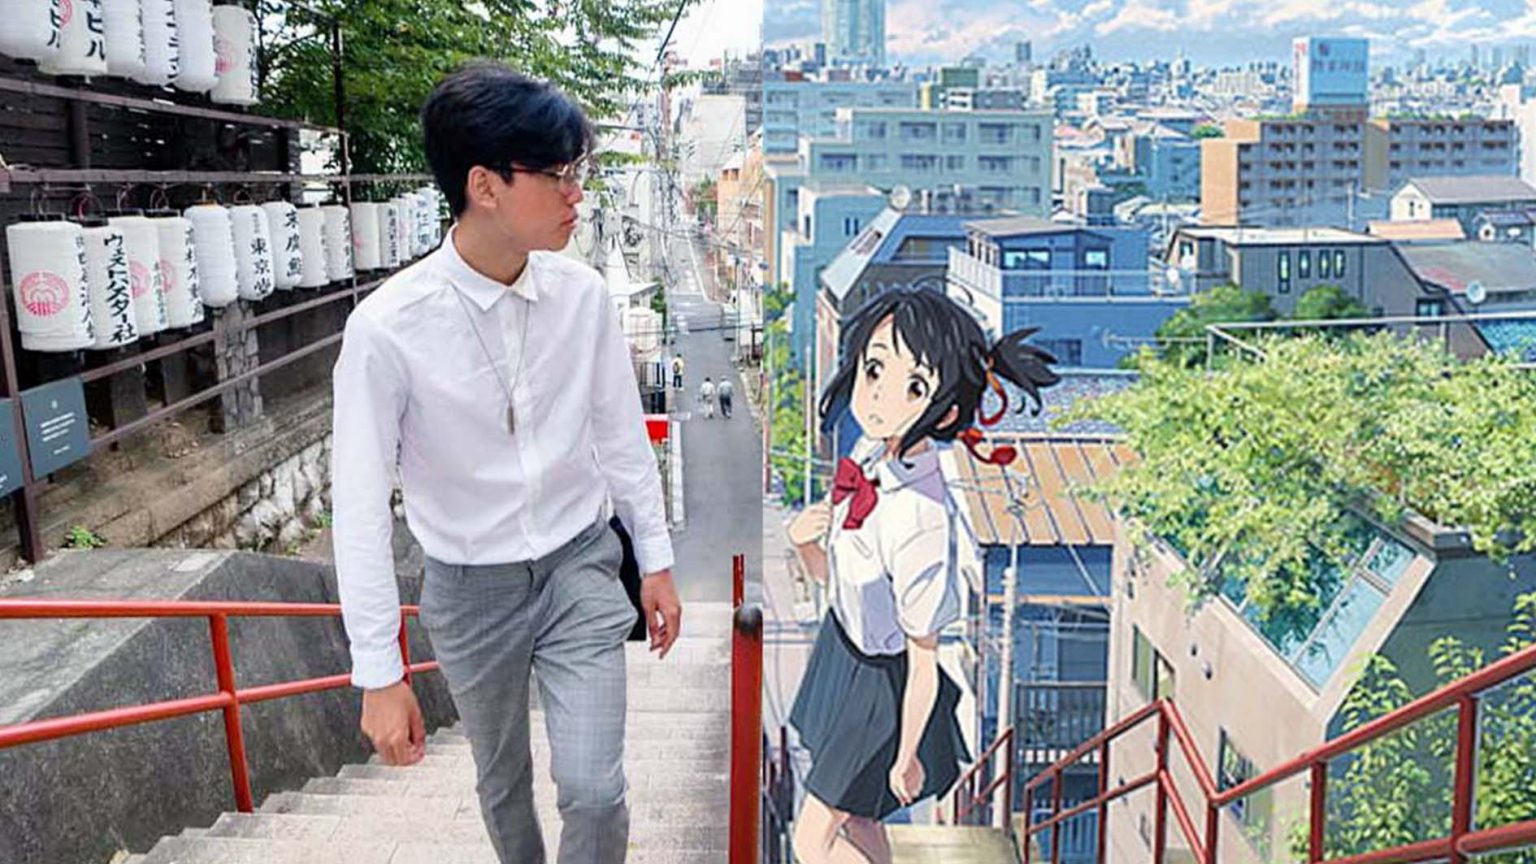 A person standing near the same stairs as the one showed in the movie Your Name, trying to mimic 